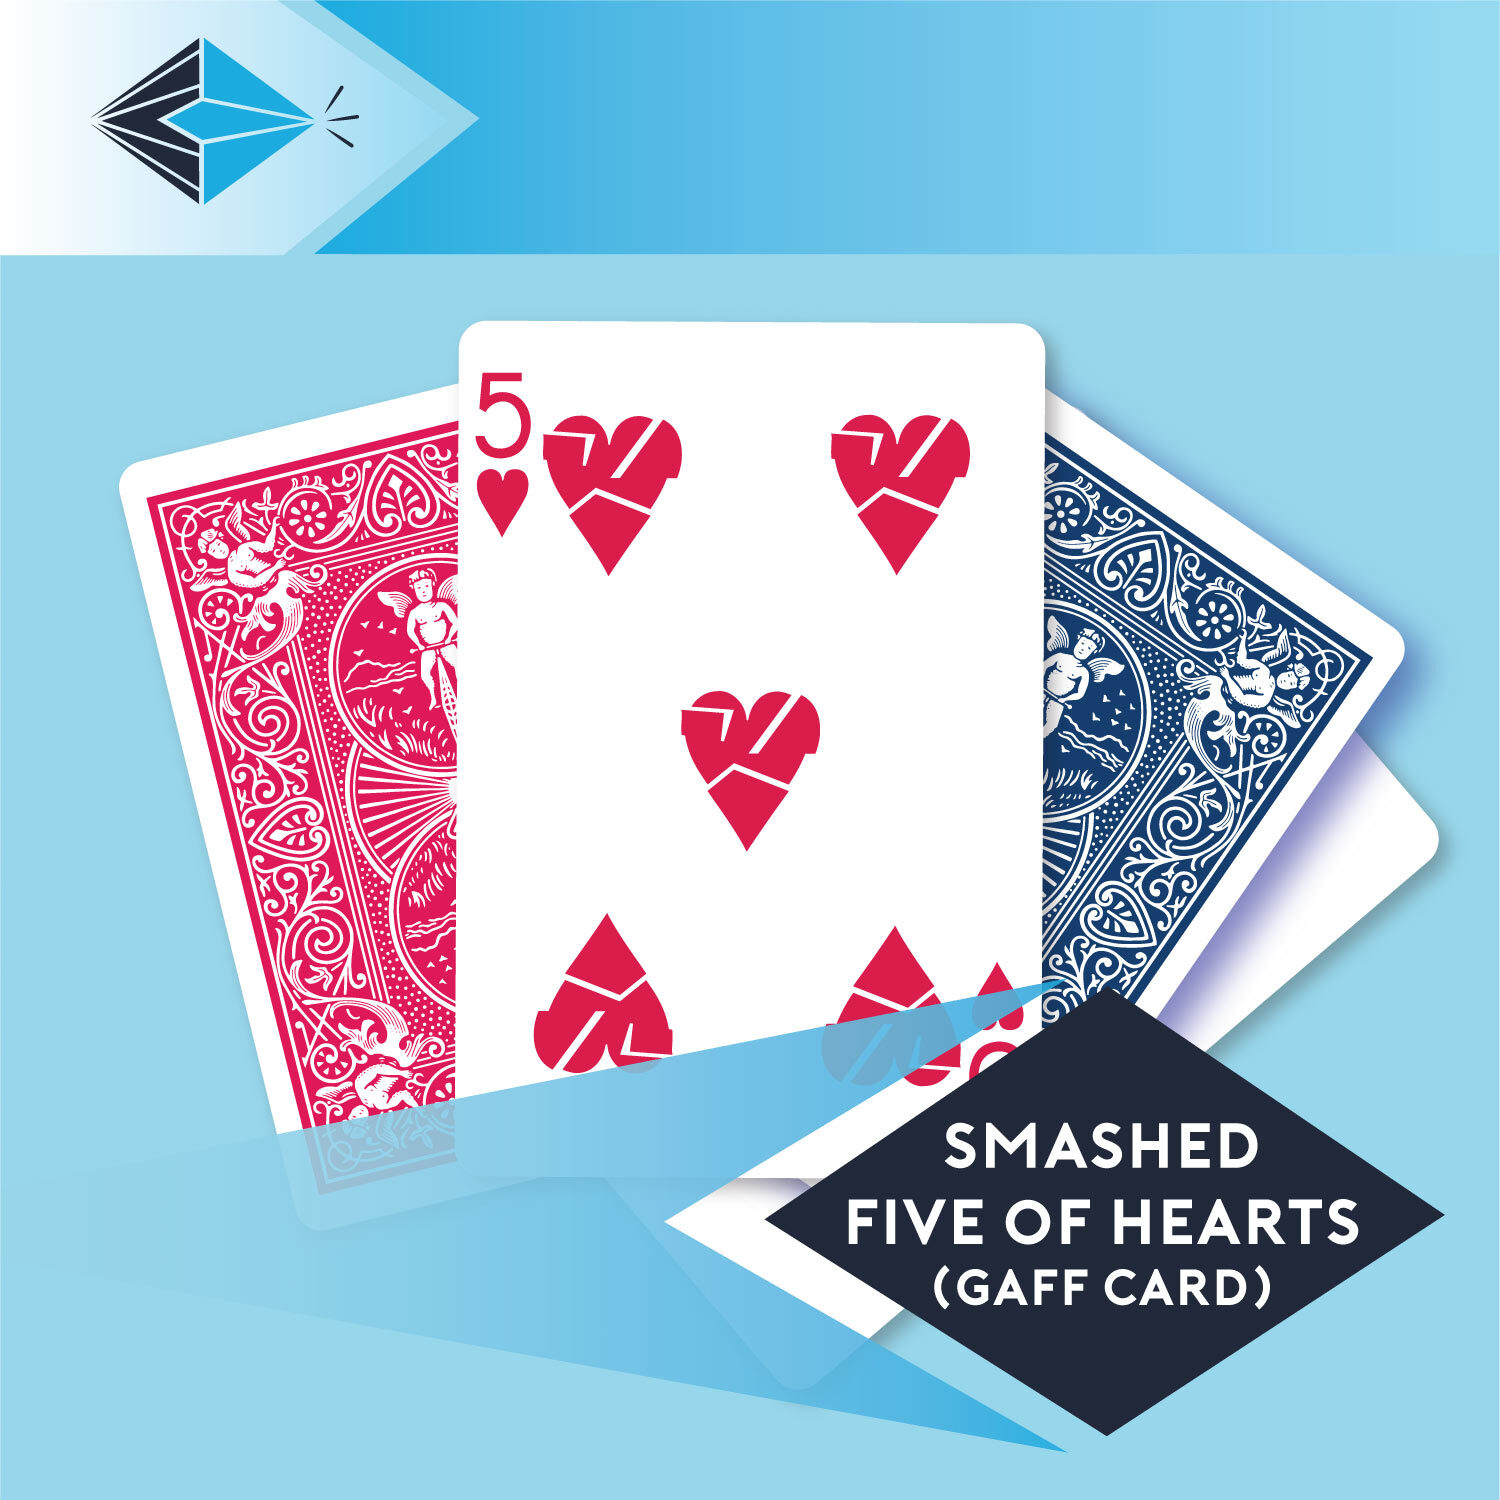 smashed five of hearts 28 gaff card playing card for magicians printing printers Stockport Manchester UK